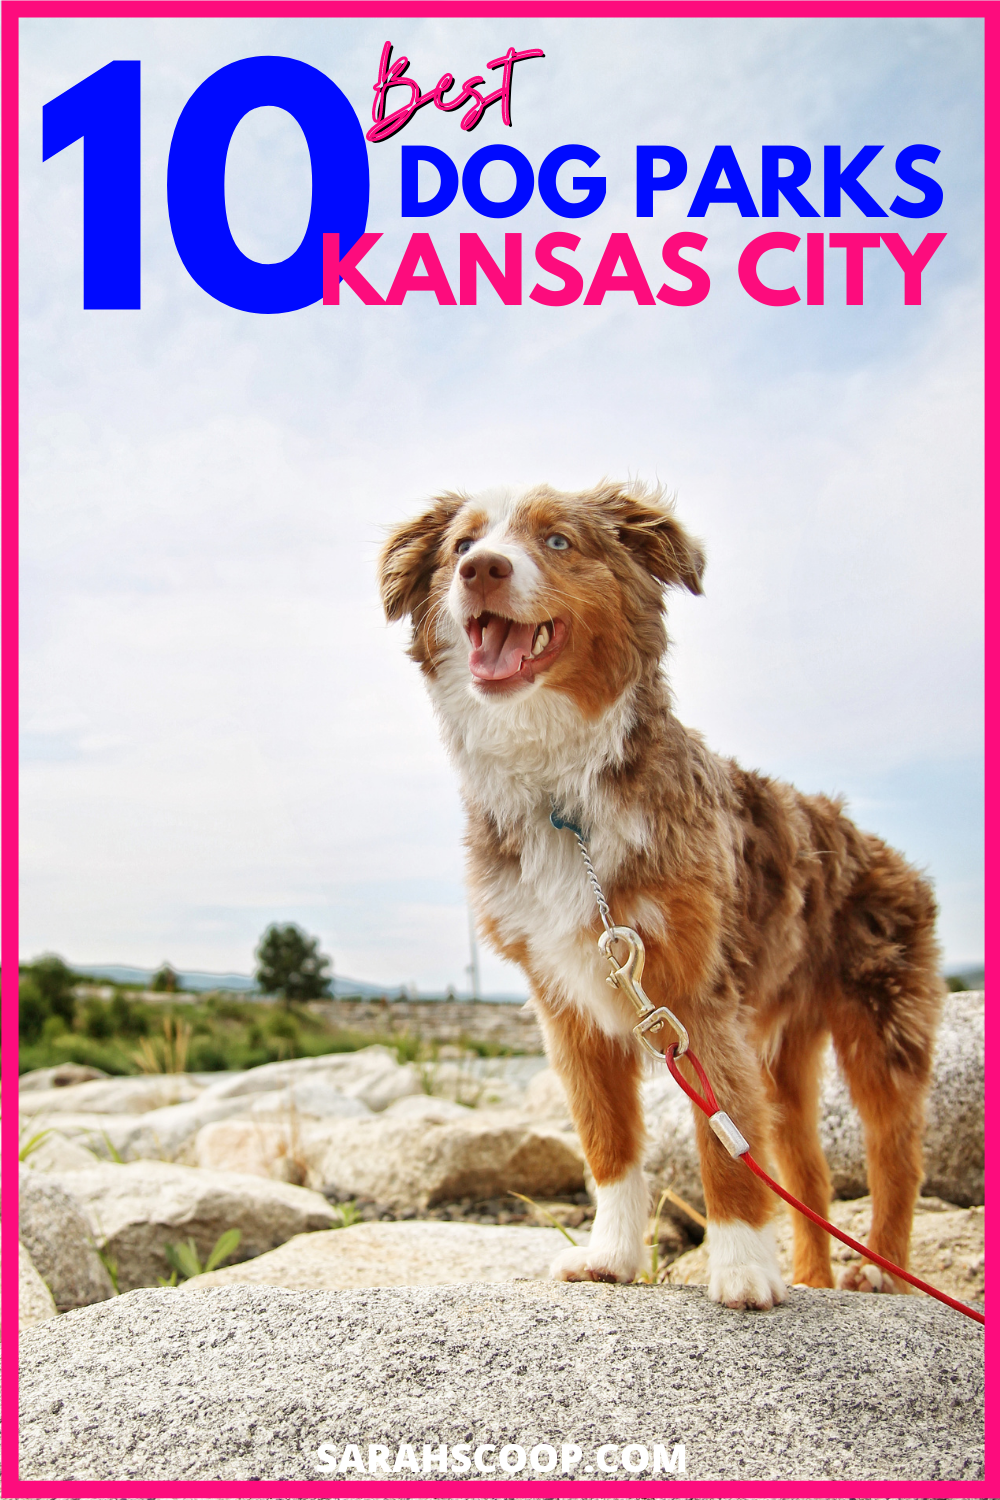 Top-rated dog parks in Kansas City.